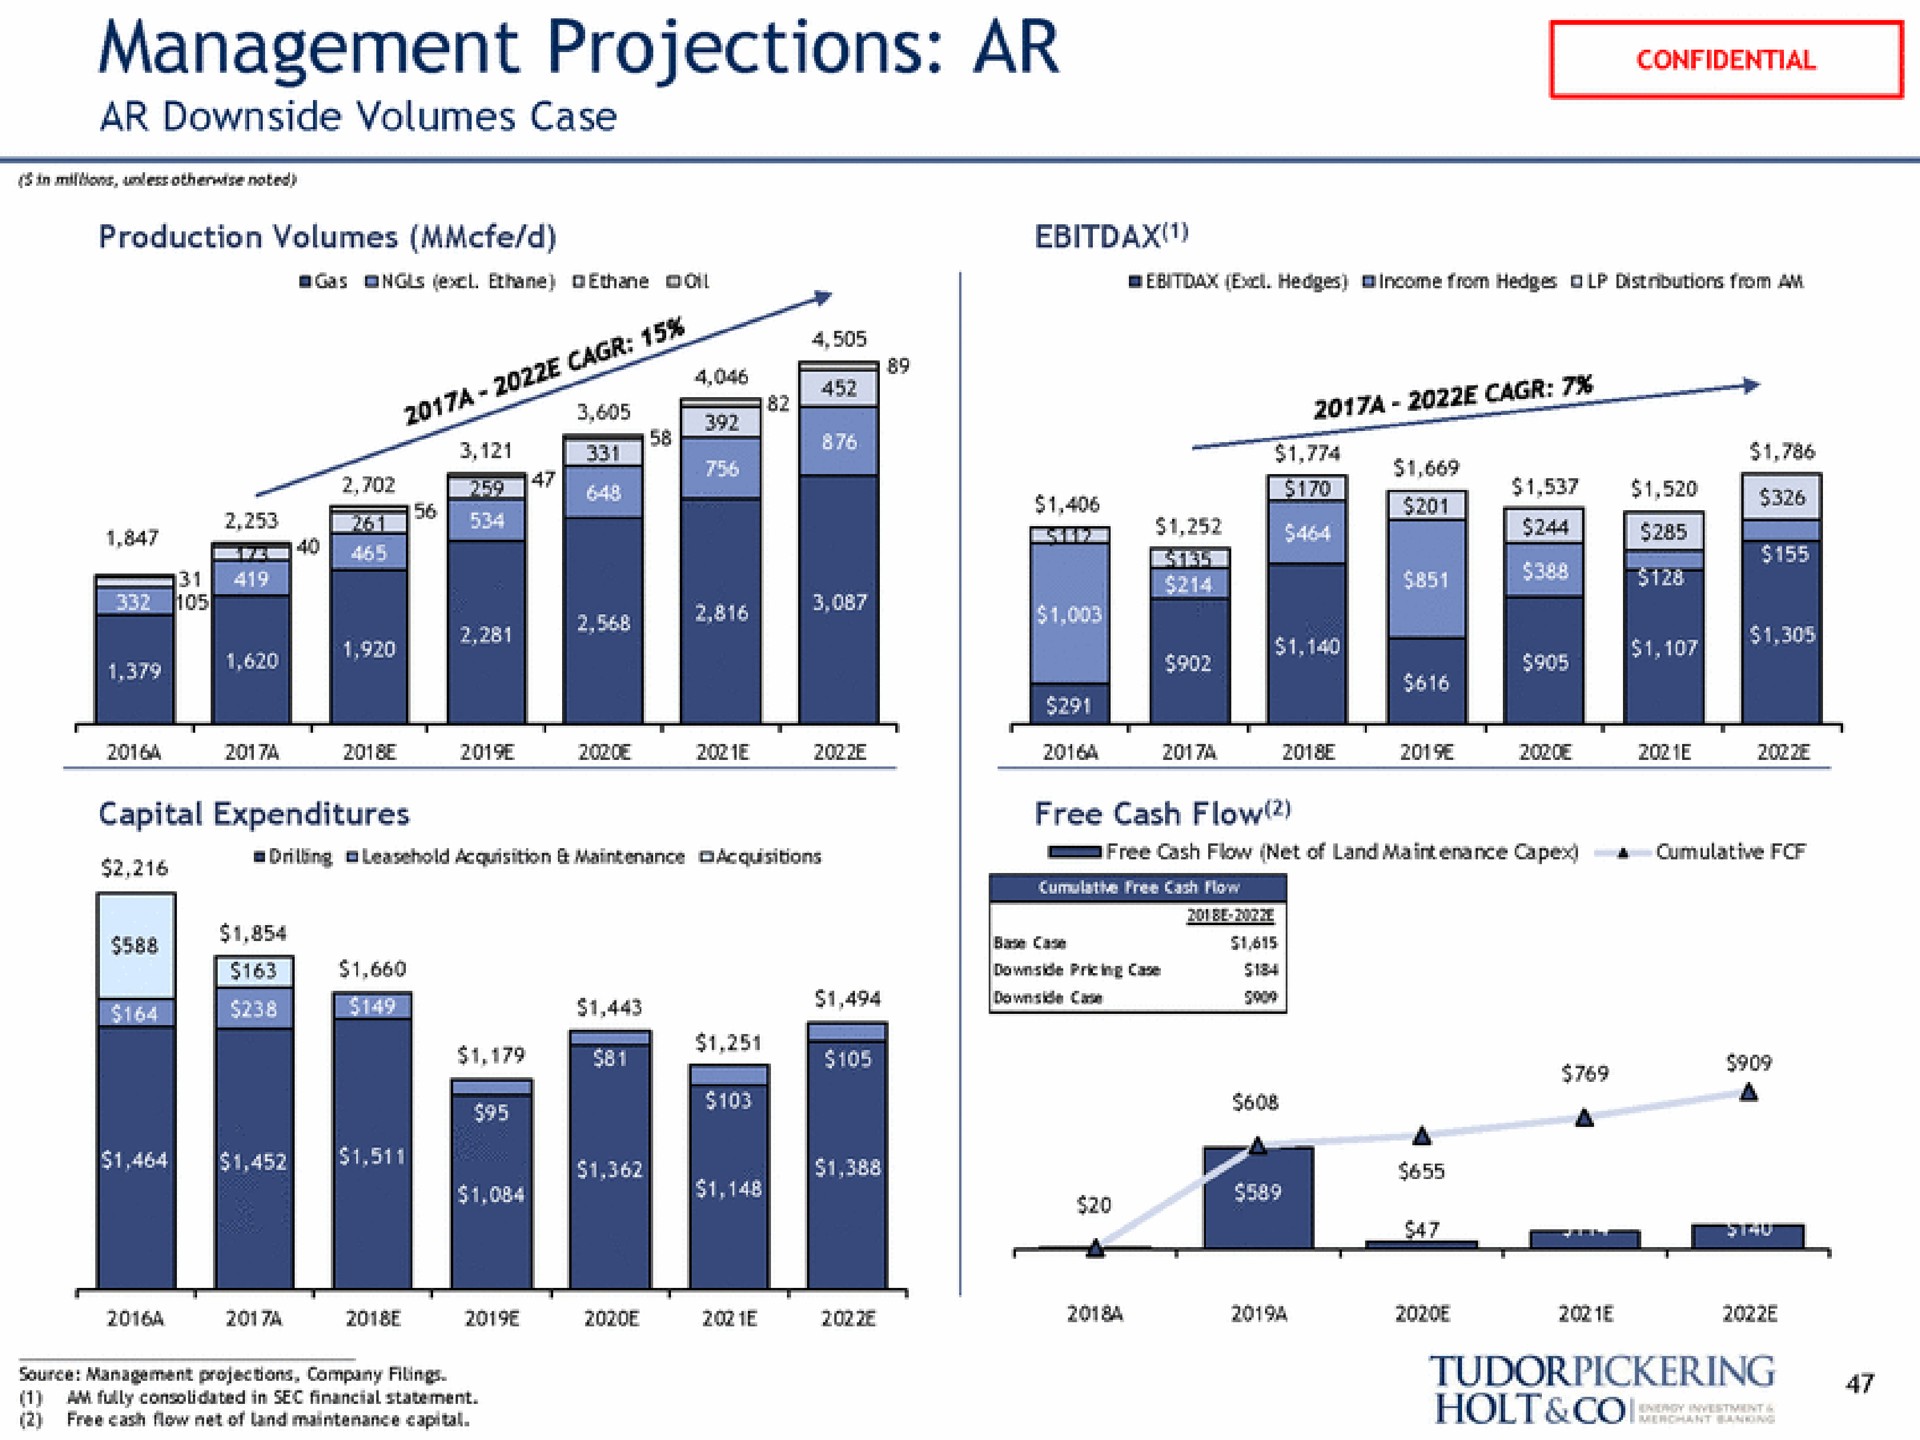 management projections source management projections company filings | Tudor, Pickering, Holt & Co